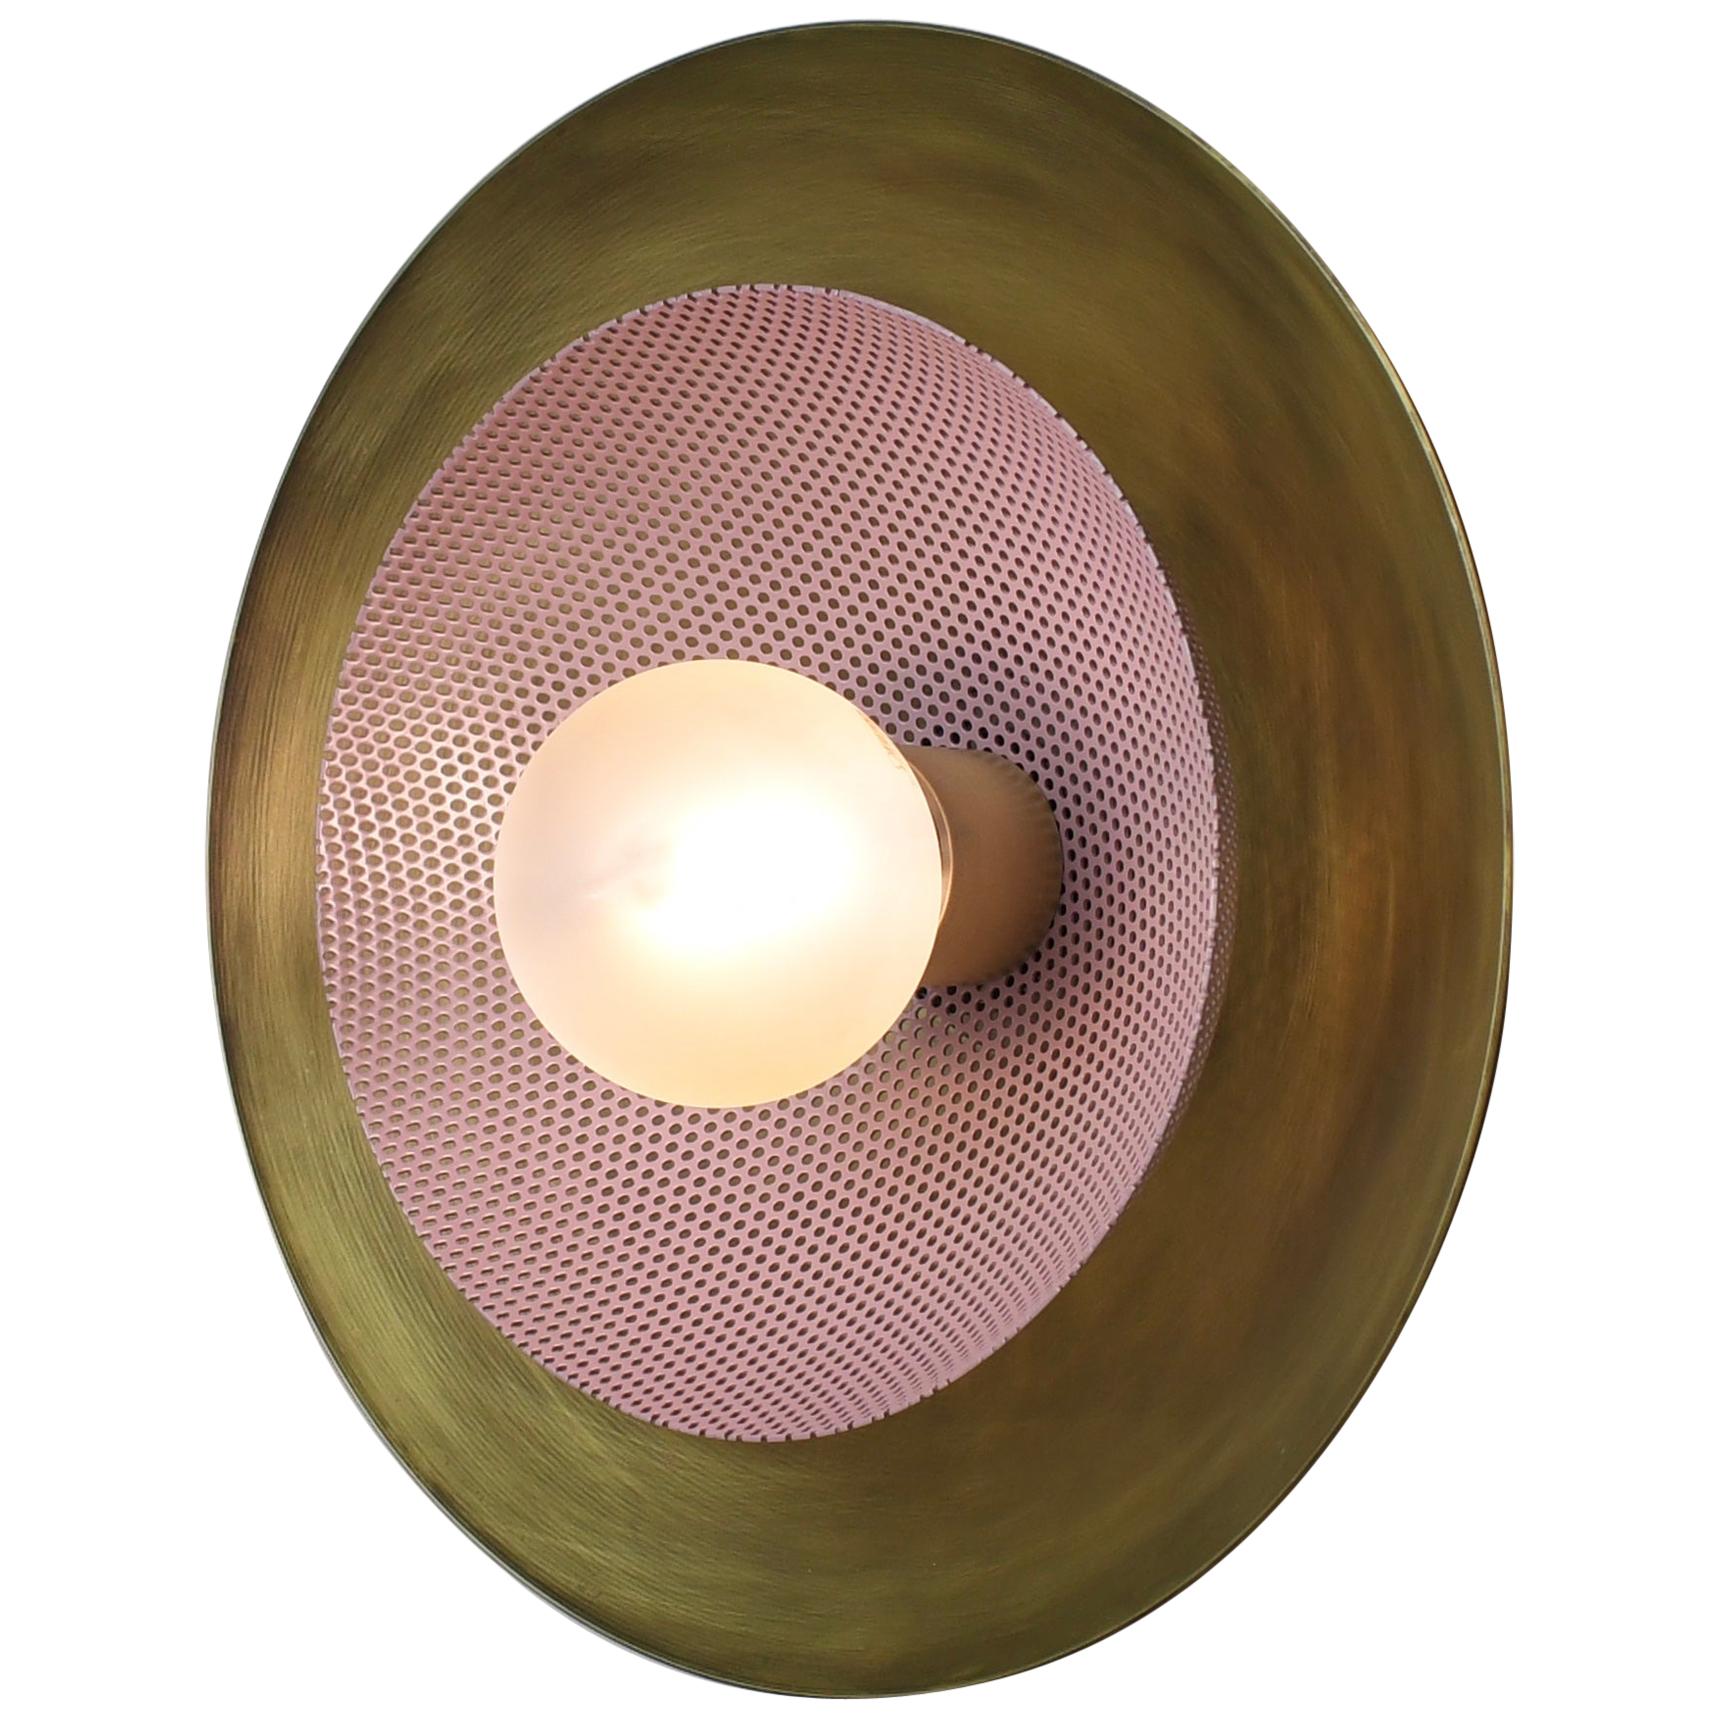 Centric Wall Sconce in Solid Brass & Lilac Enamel Mesh Blueprint Lighting, 2019 For Sale